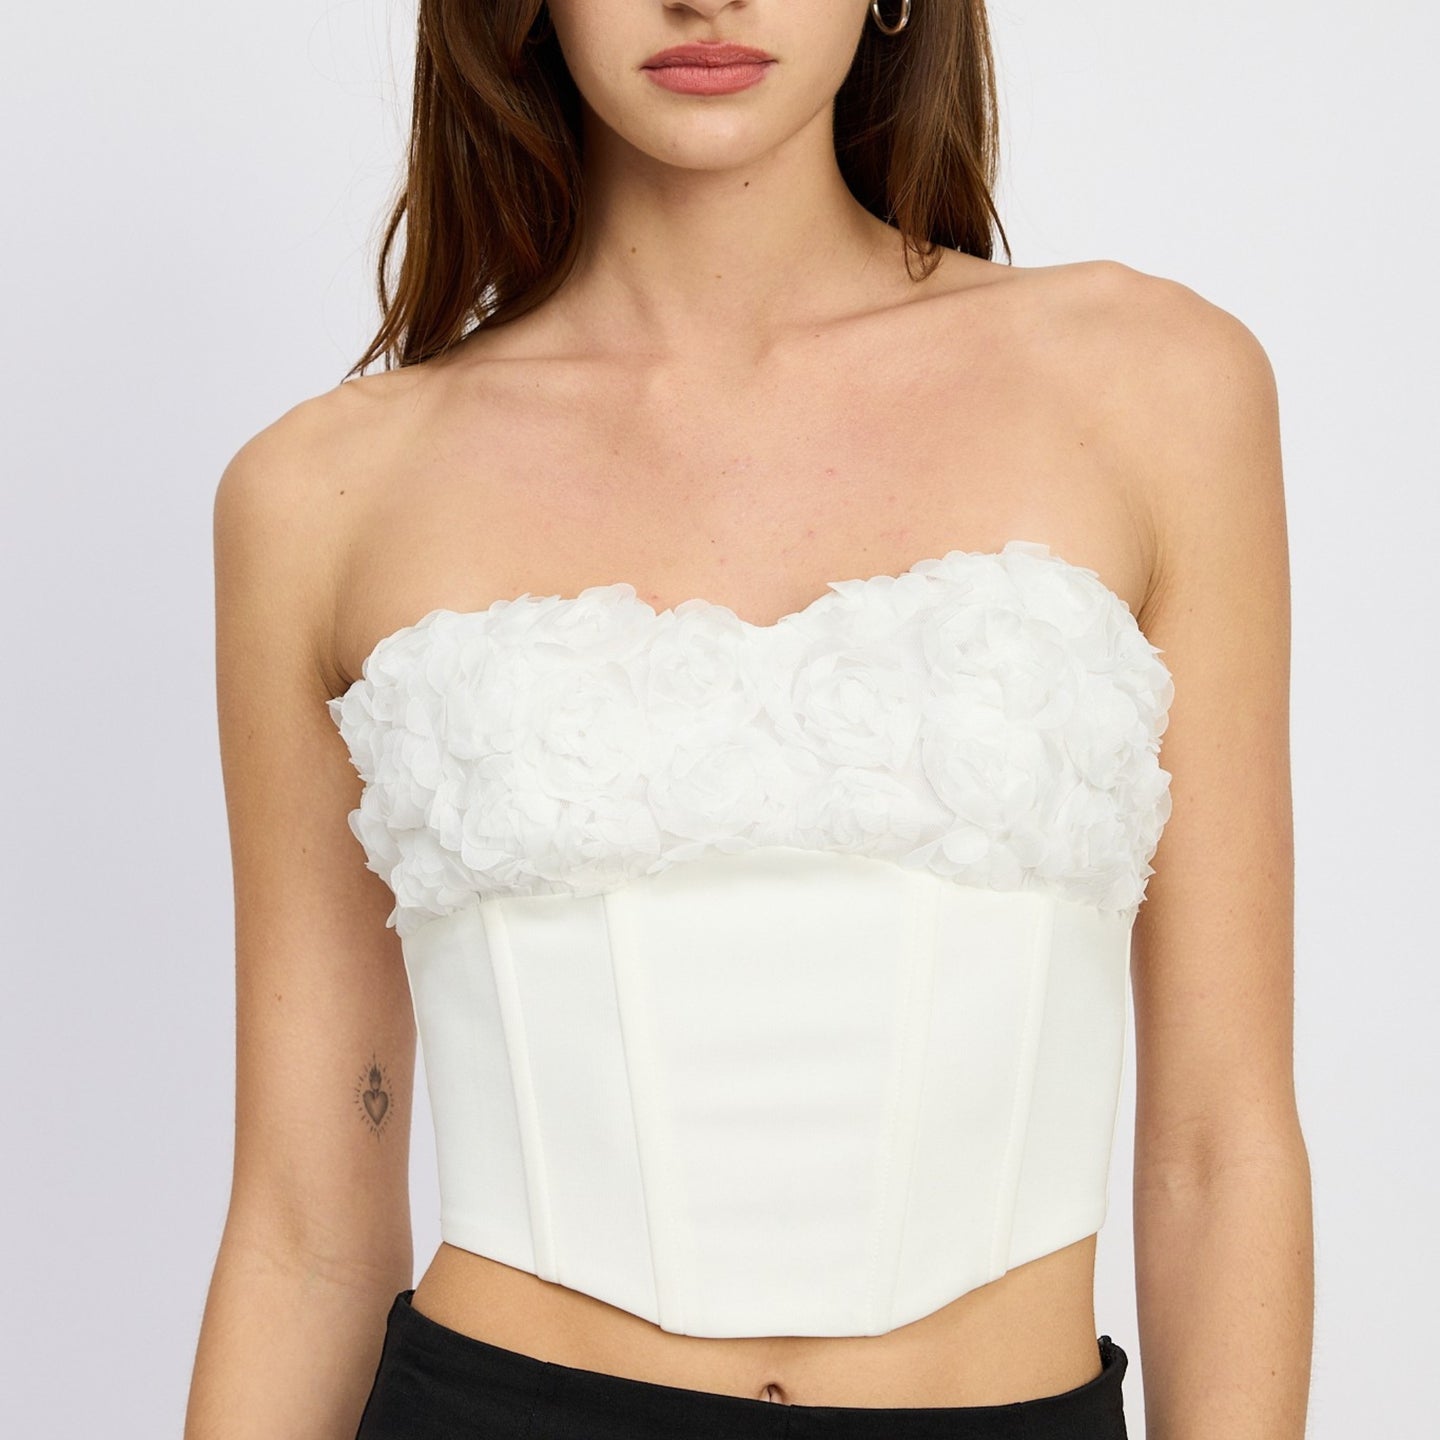 CORSET TOP WITH LACE DETAIL